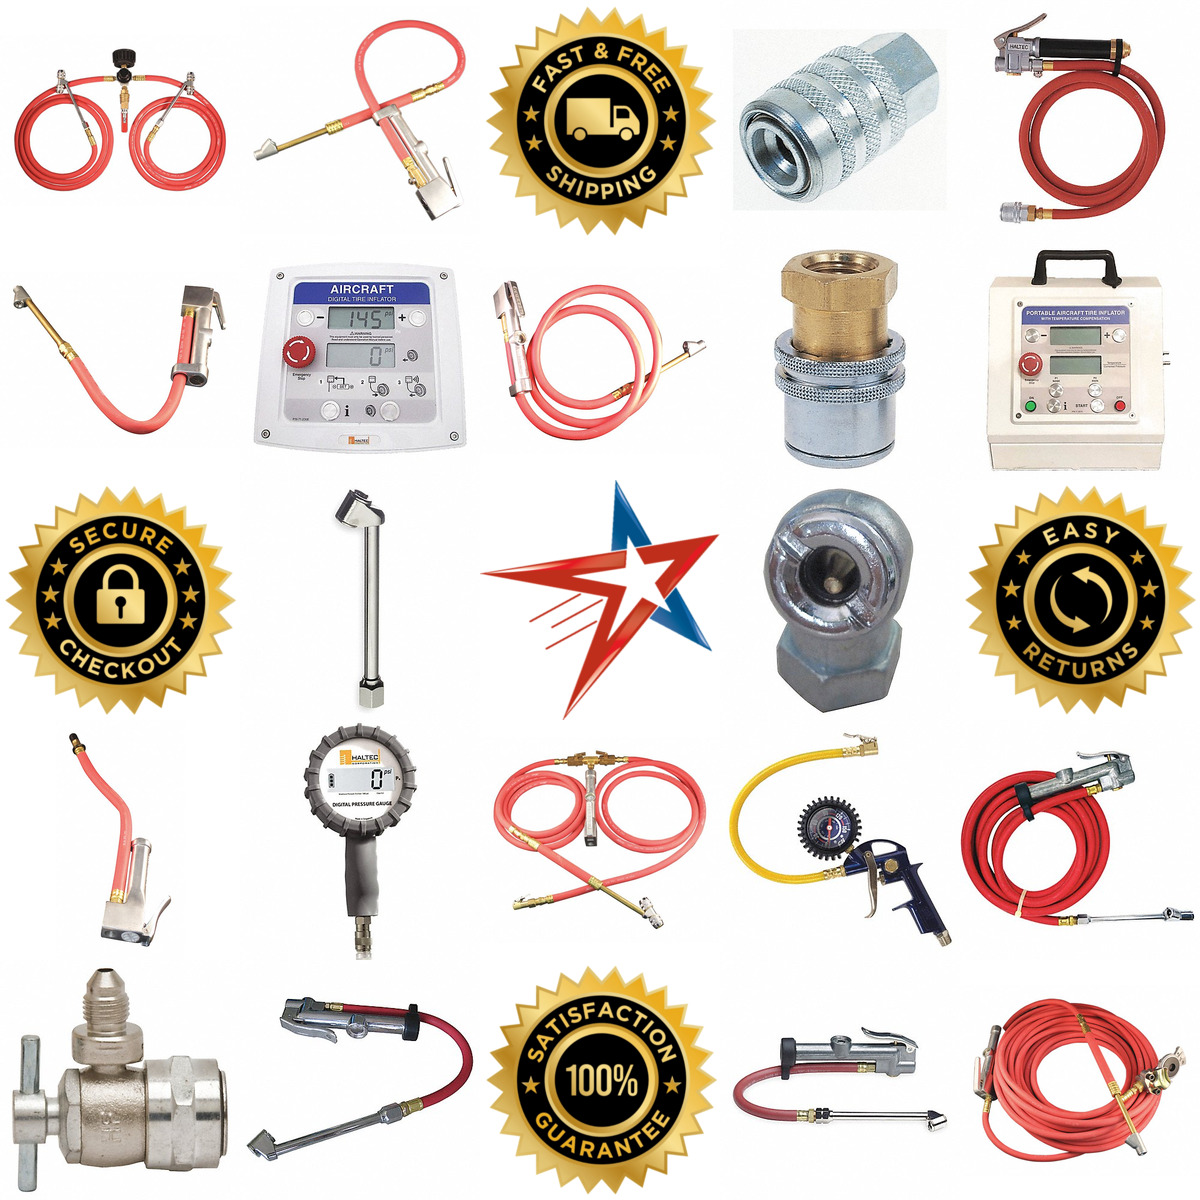 A selection of Tire Chucks and Inflators products on GoVets